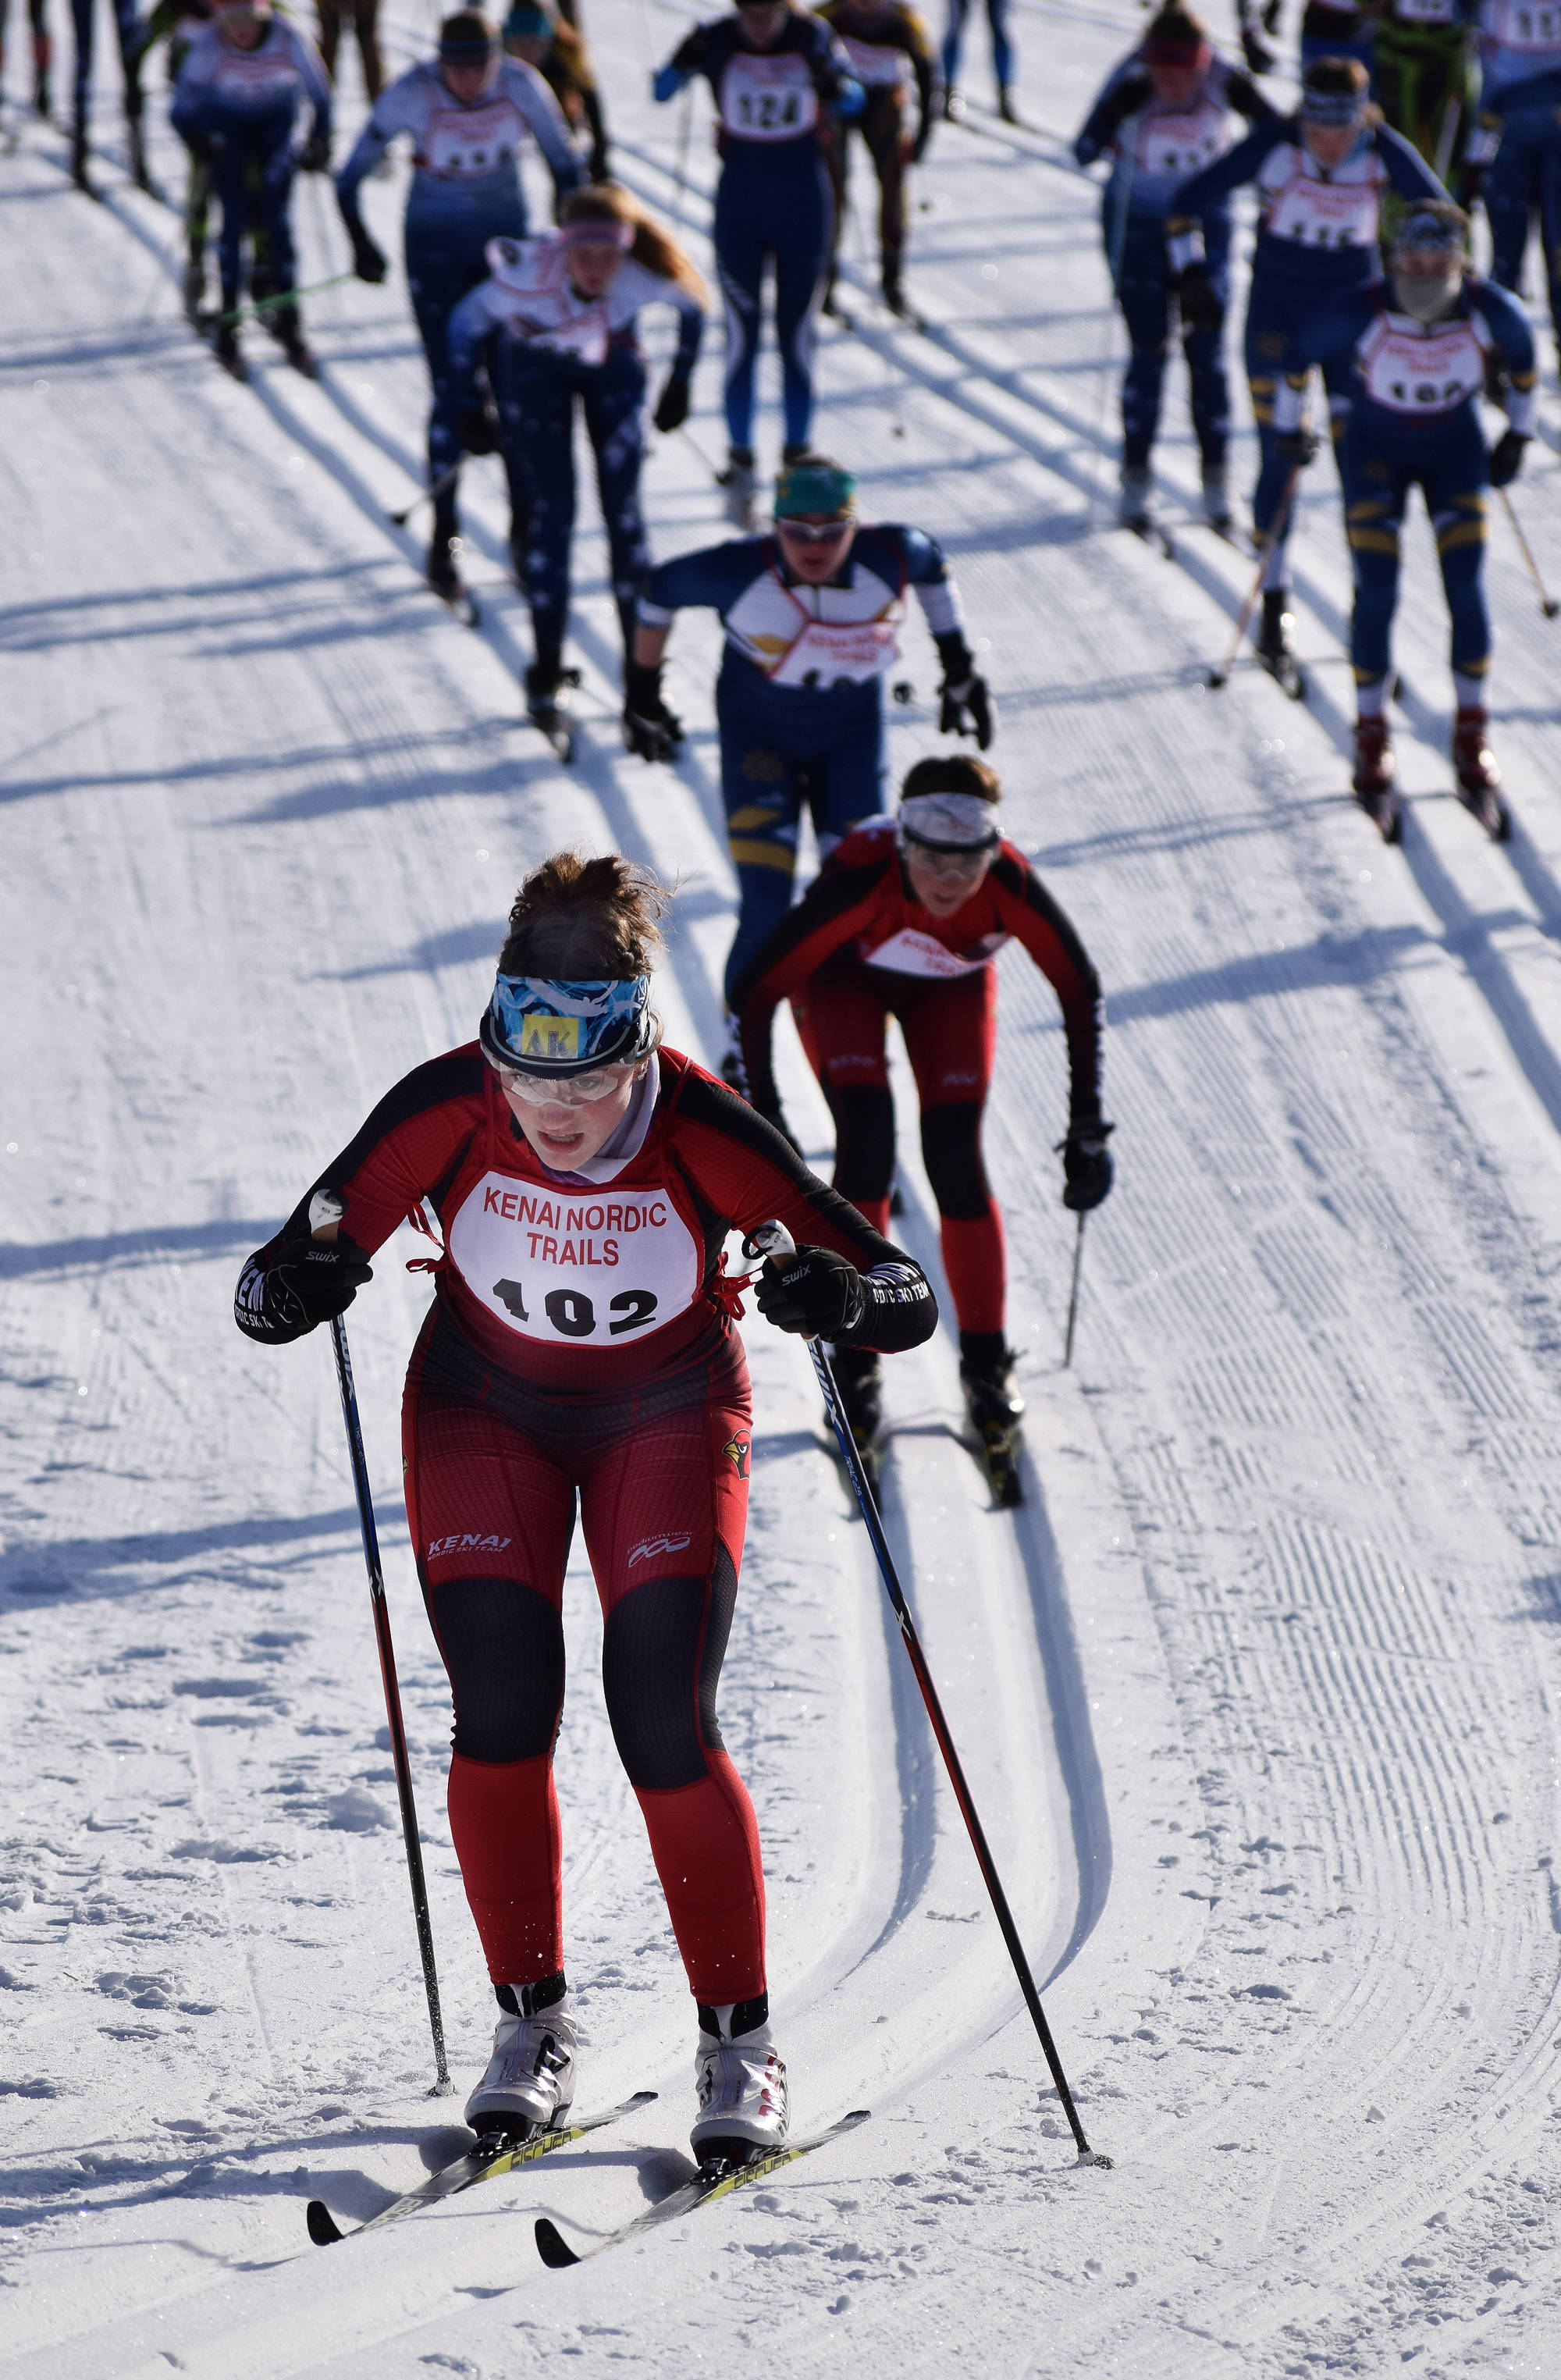 Kenai Central’s Addison Gibson (102) leads the girls field up an early hill Saturday afternoon at the Region III skiing championships at the Tsalteshi Trails in Soldotna. (Photo by Joey Klecka/Peninsula Clarion)